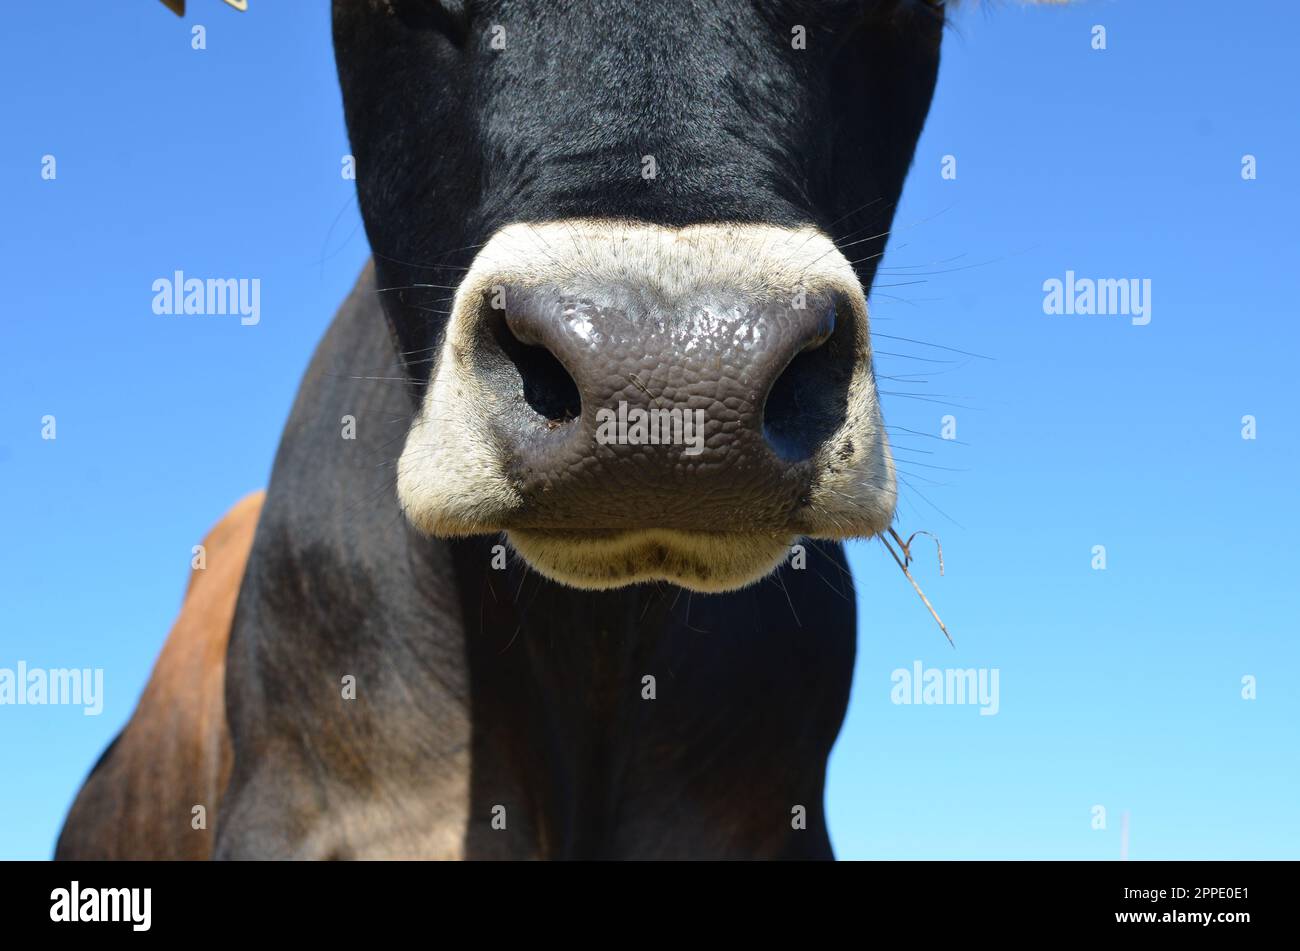 A close up of the face of a Jersey Cow in Yorkshire, England Stock Photo -  Alamy